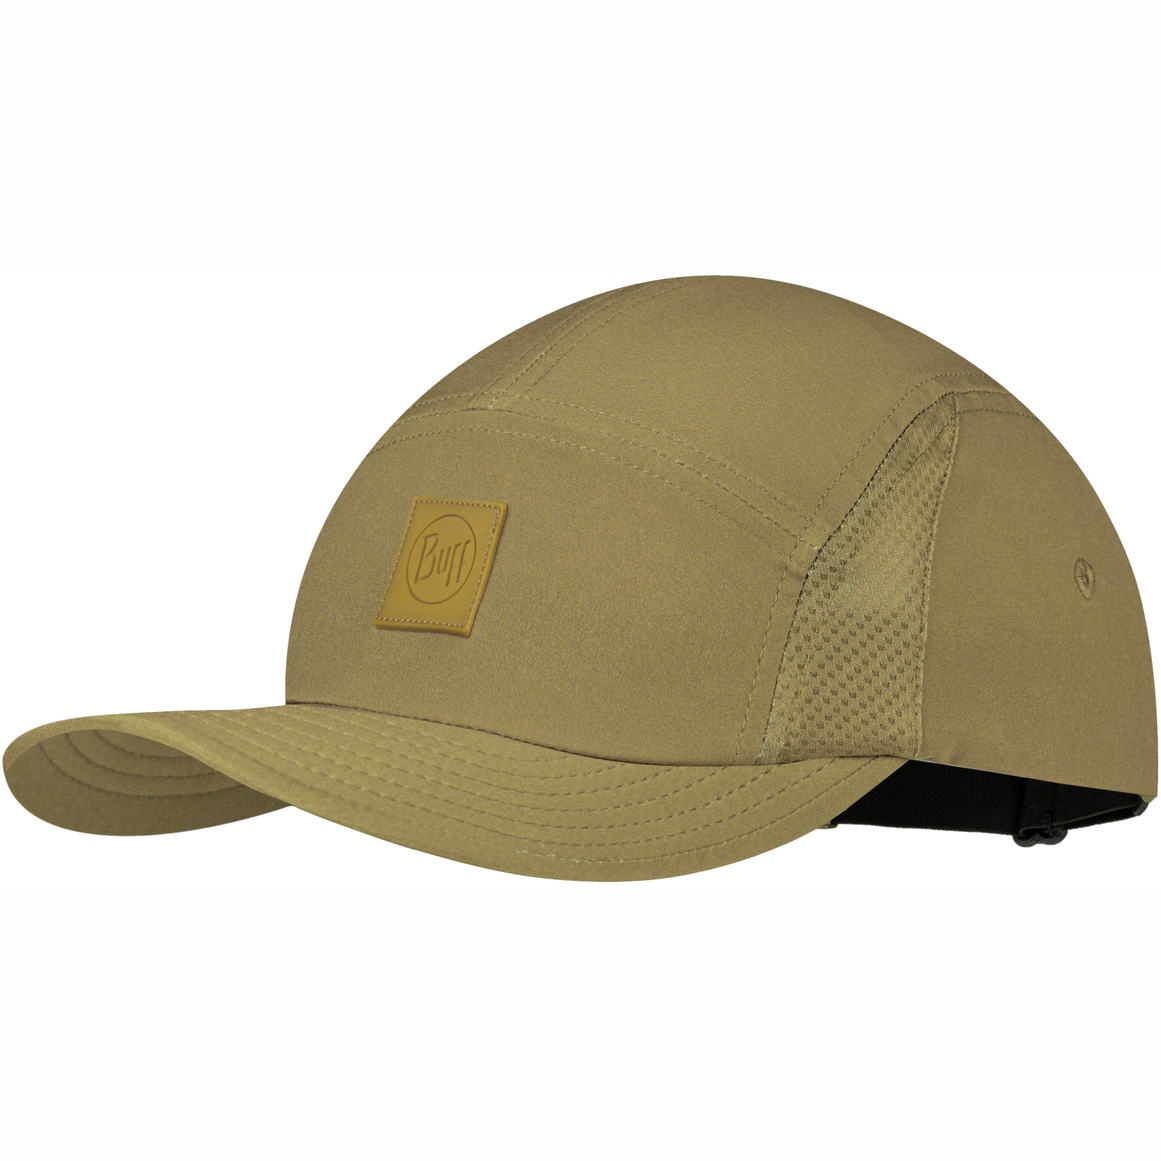 Picture of Buff® 5 Panel Go Cap Unisex - Solid Fawn